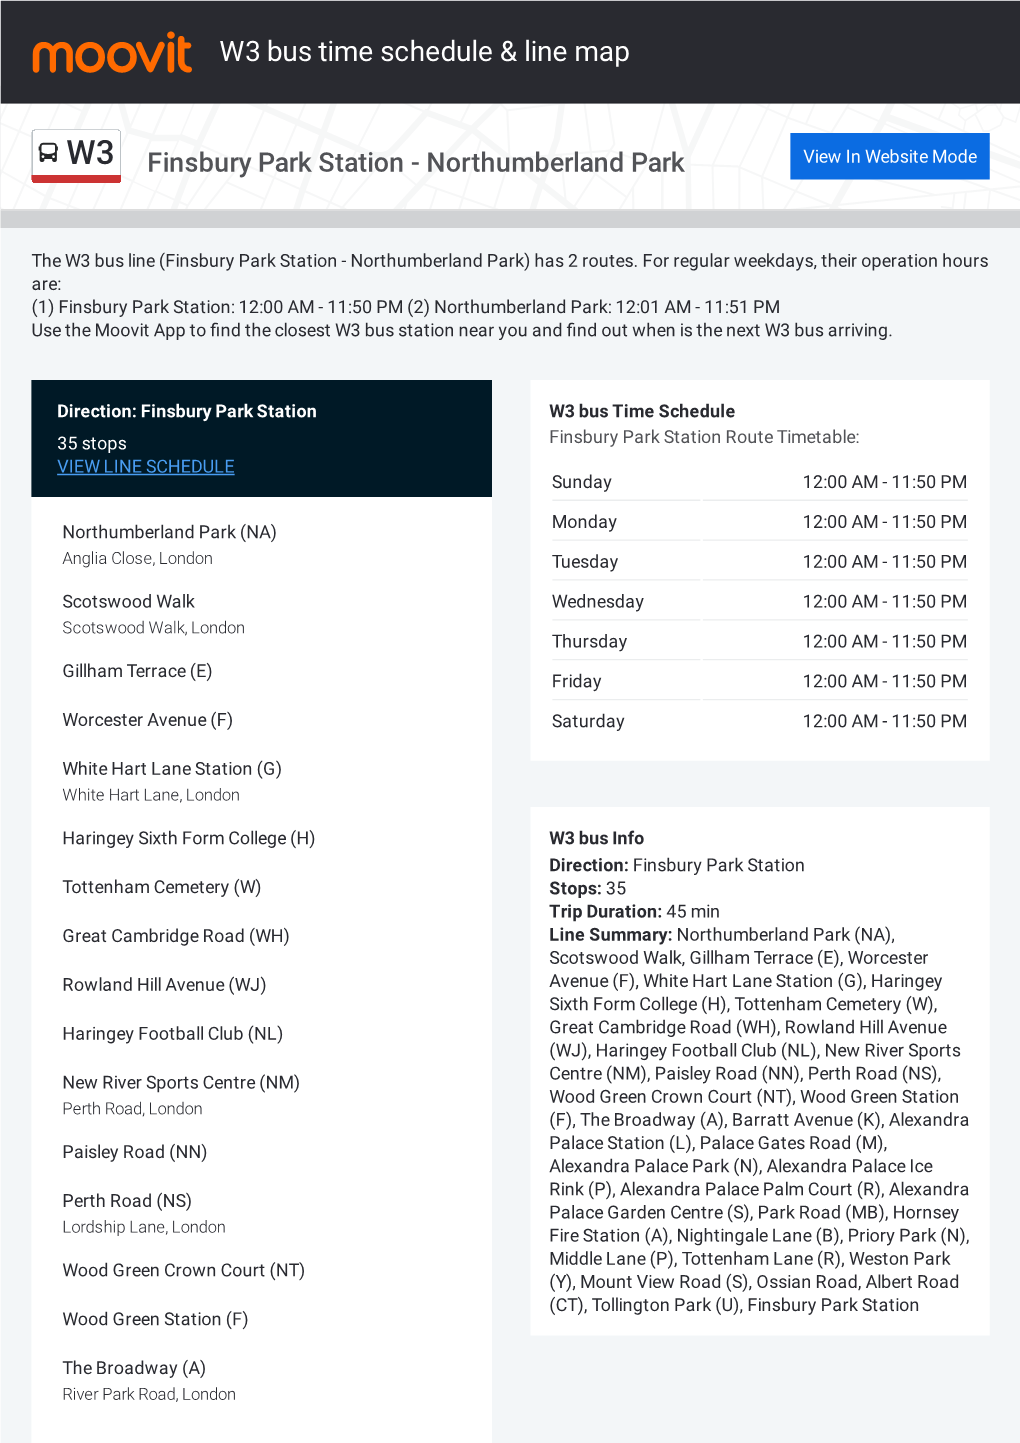 W3 Bus Time Schedule & Line Route